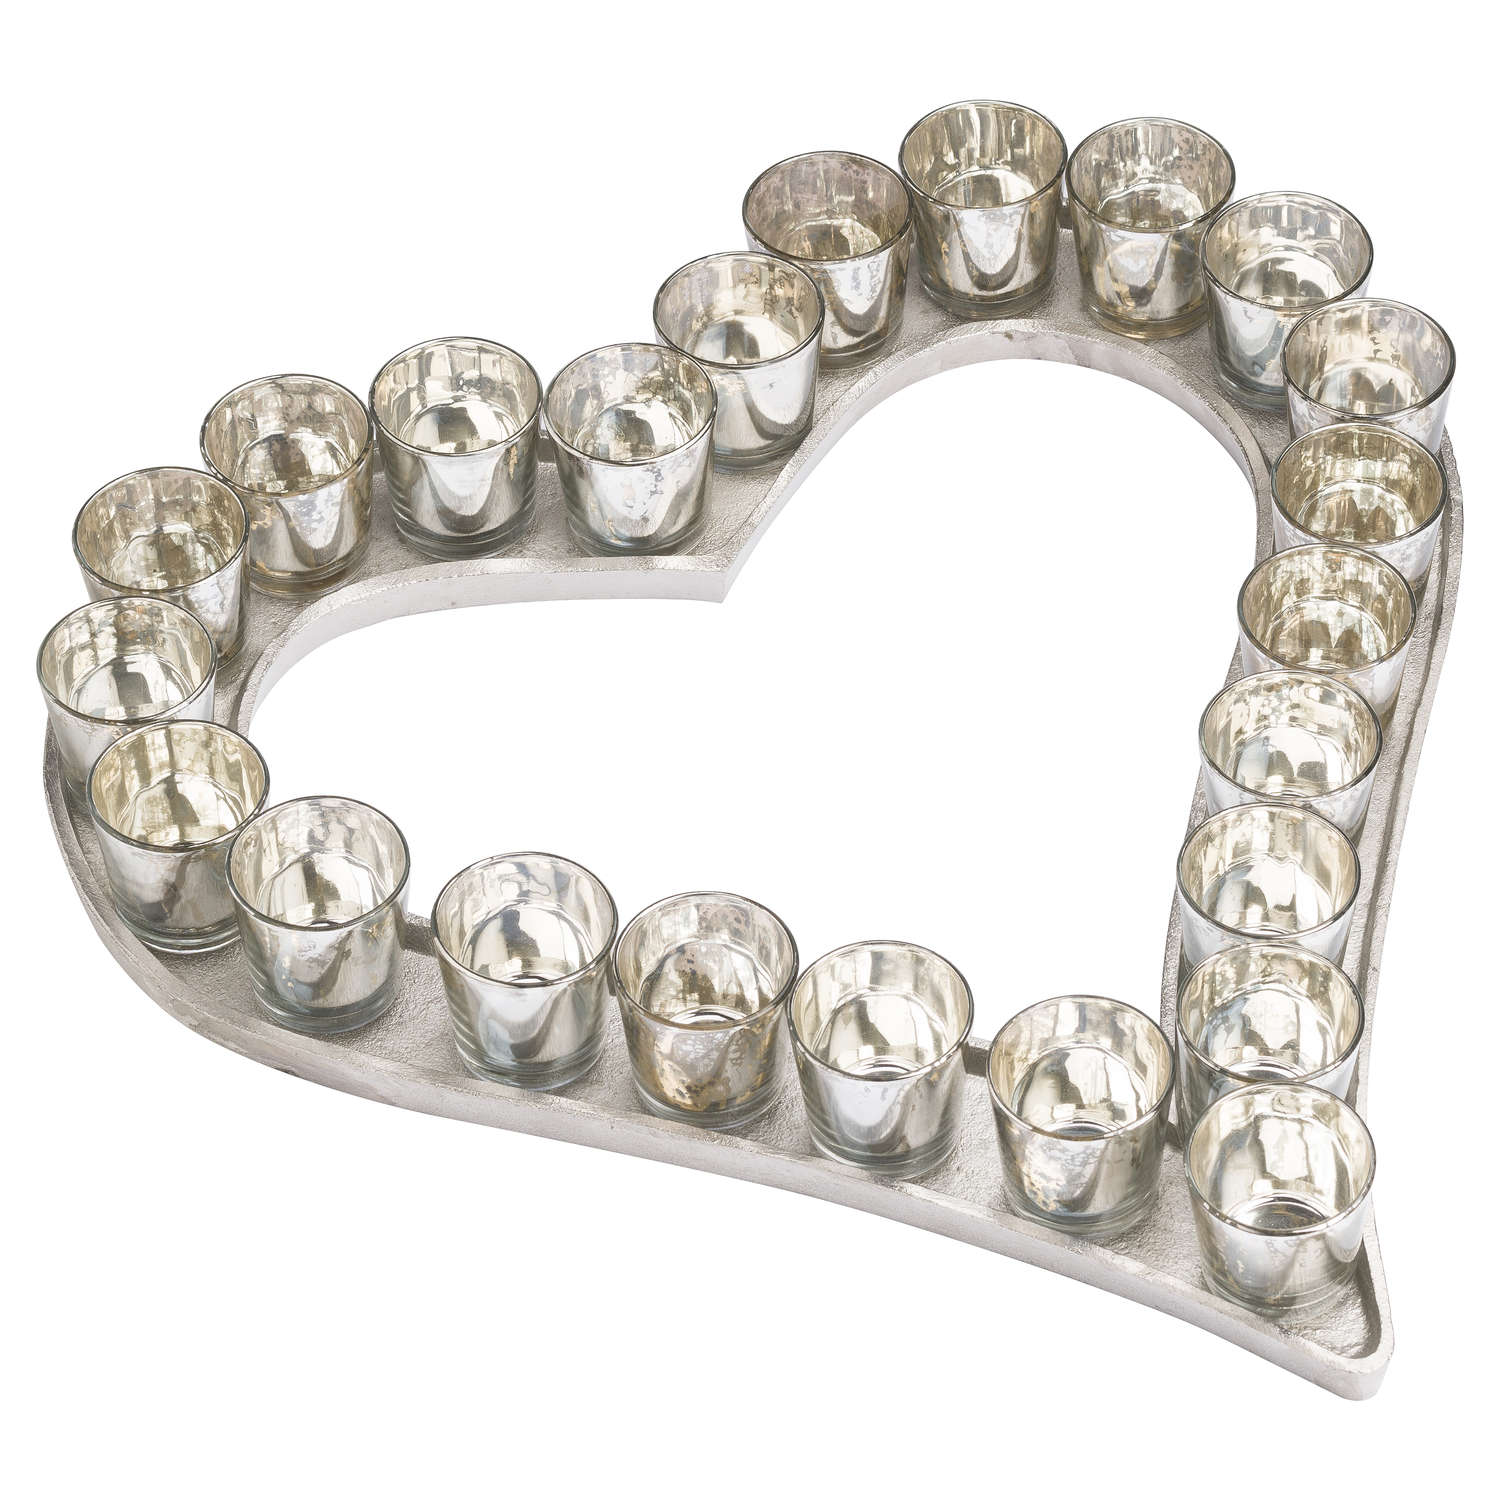 Large Cast Aluminium Heart Tray With Silver Glass Votives - Image 1